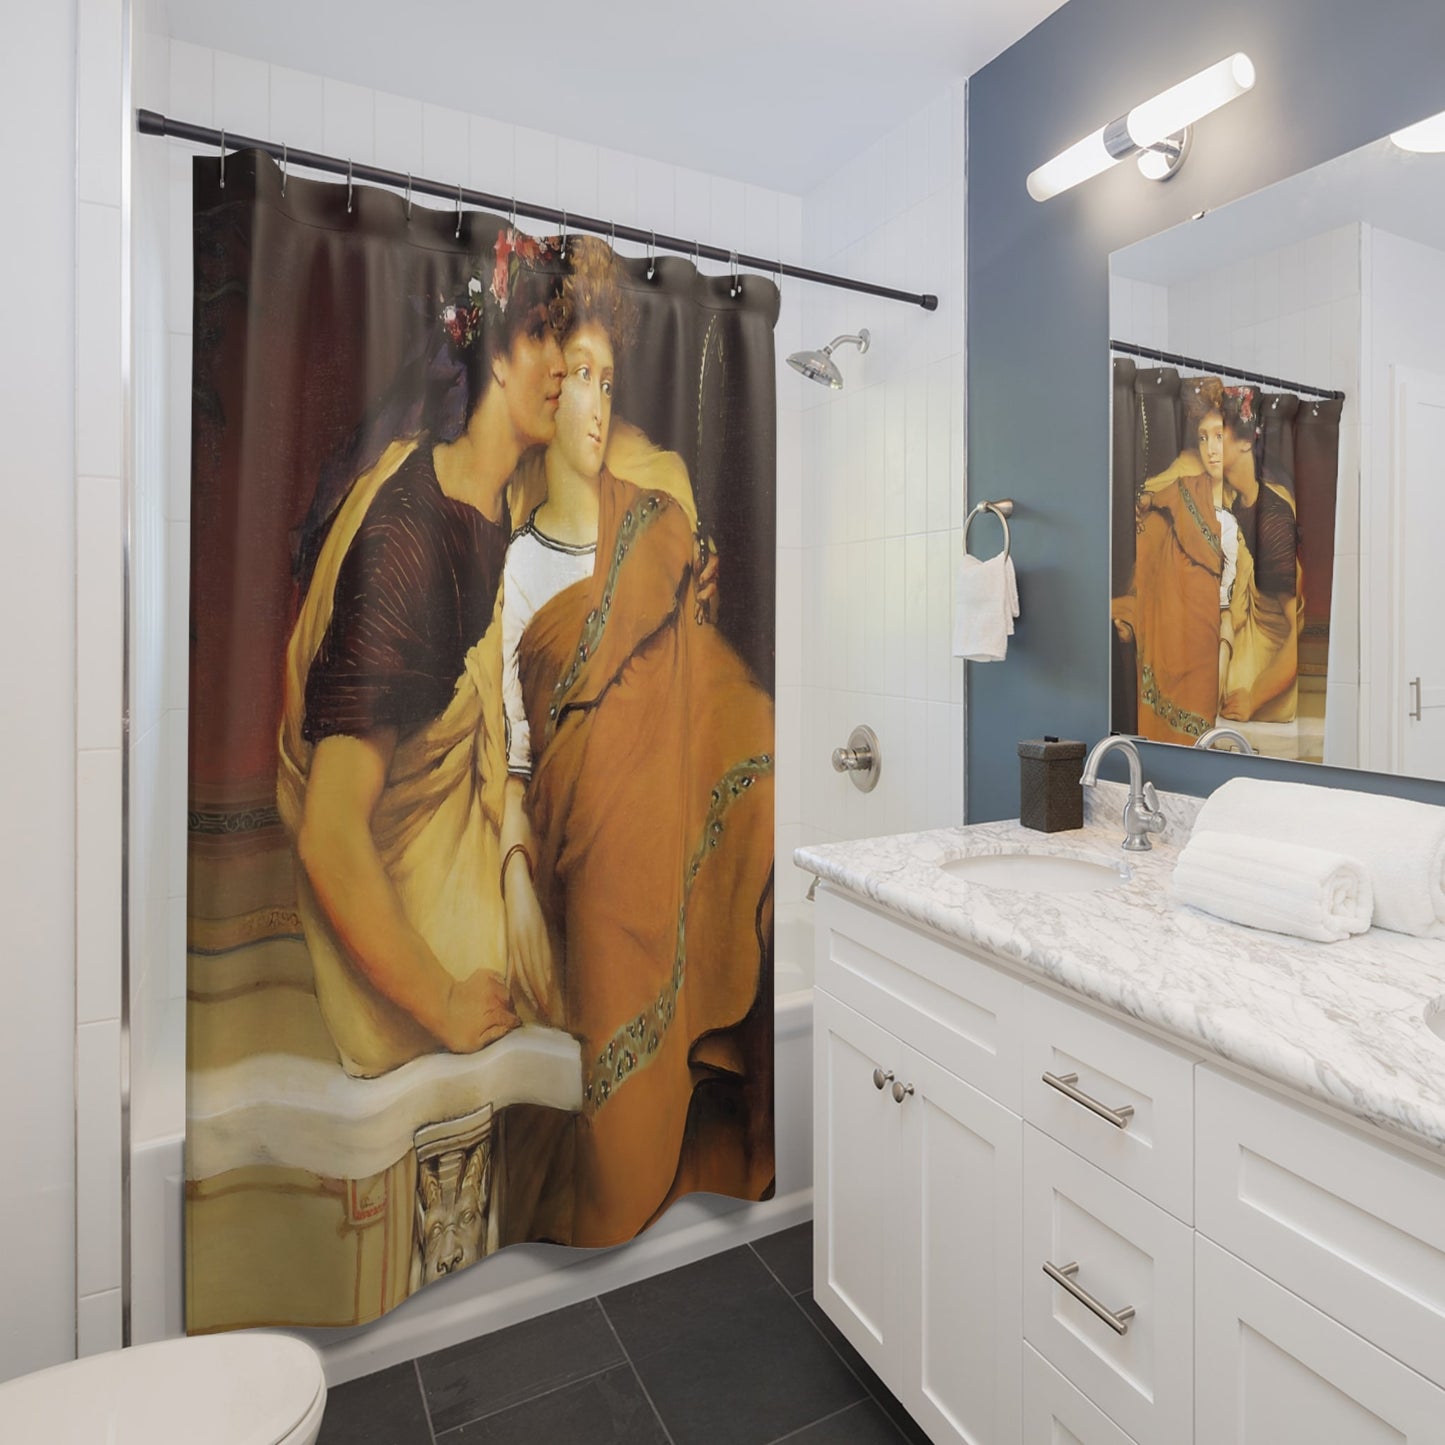 Renaissance Youth Shower Curtain Best Bathroom Decorating Ideas for Love and Romance Decor